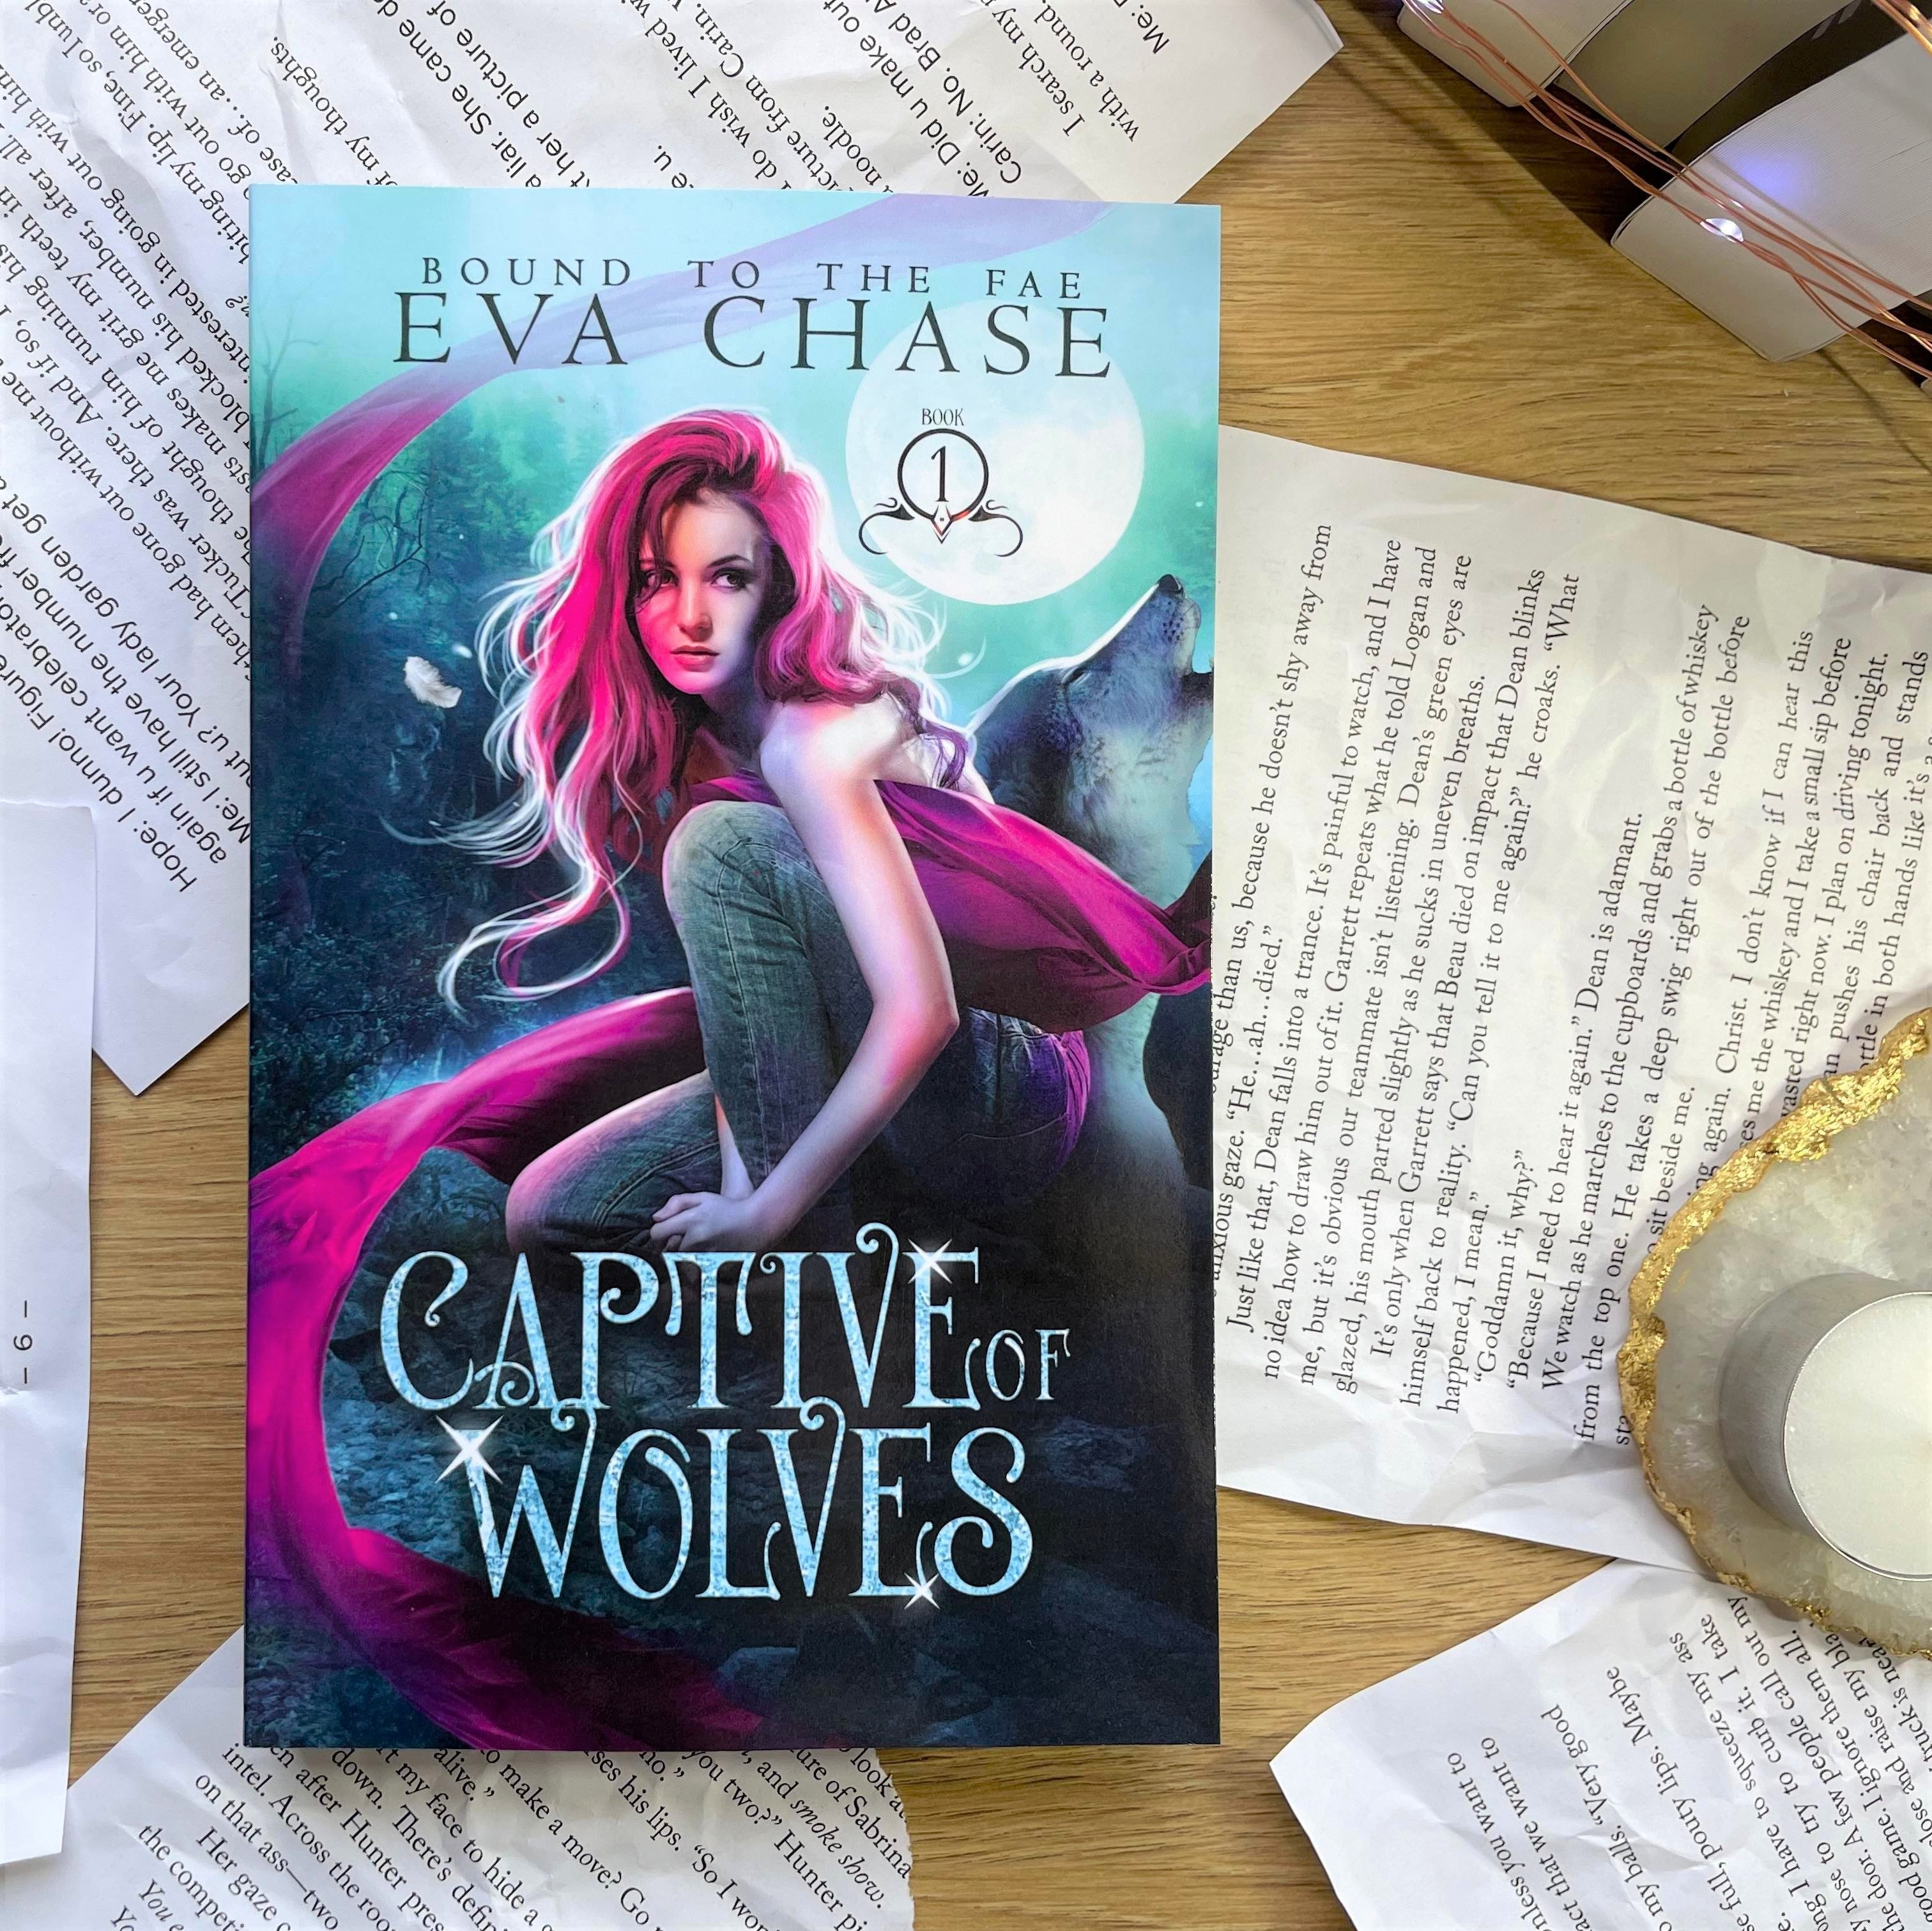 Bound to the Fae by Eva Chase